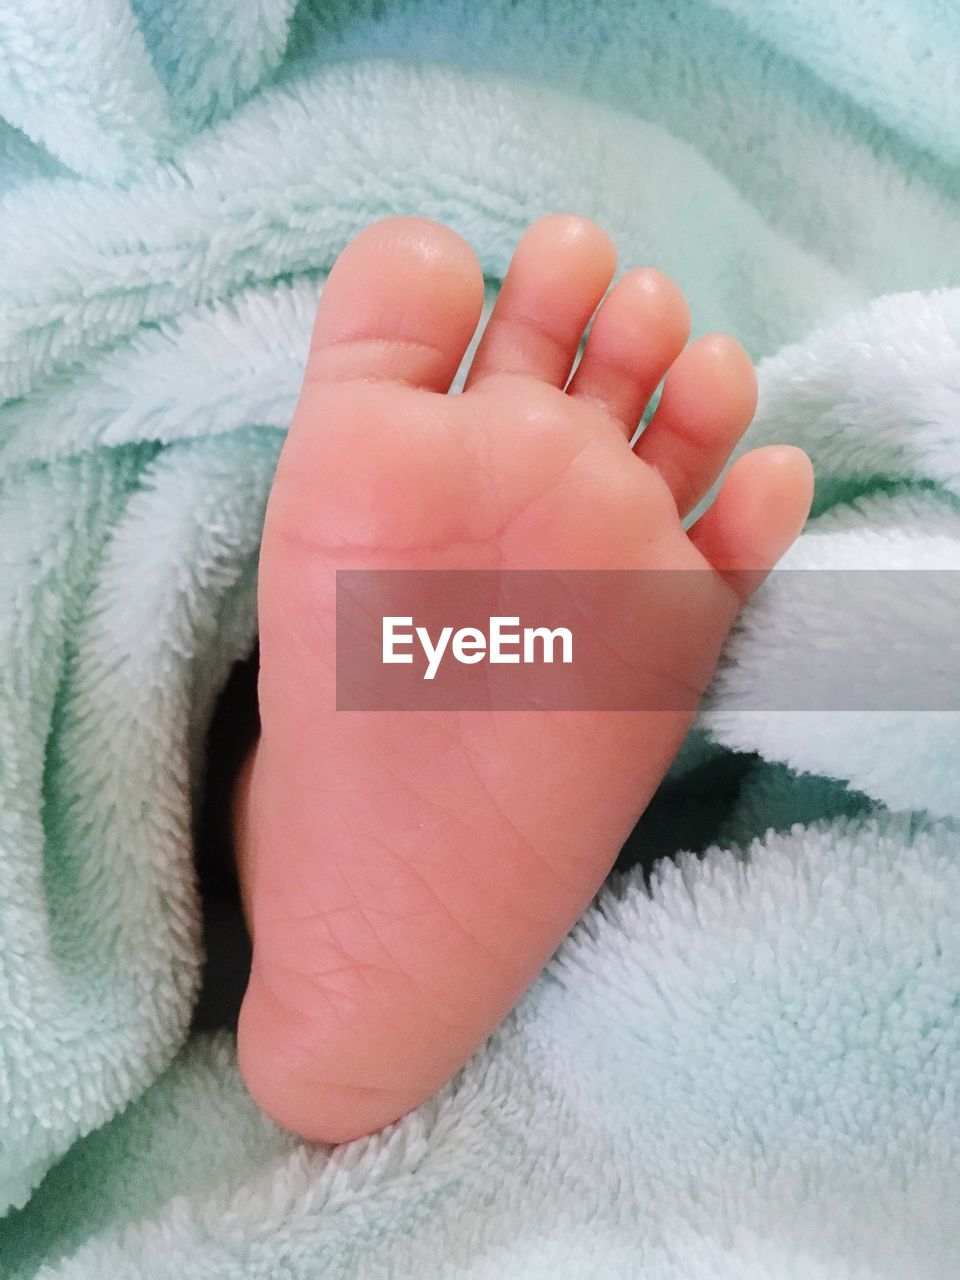 Close-up of baby foot on bed